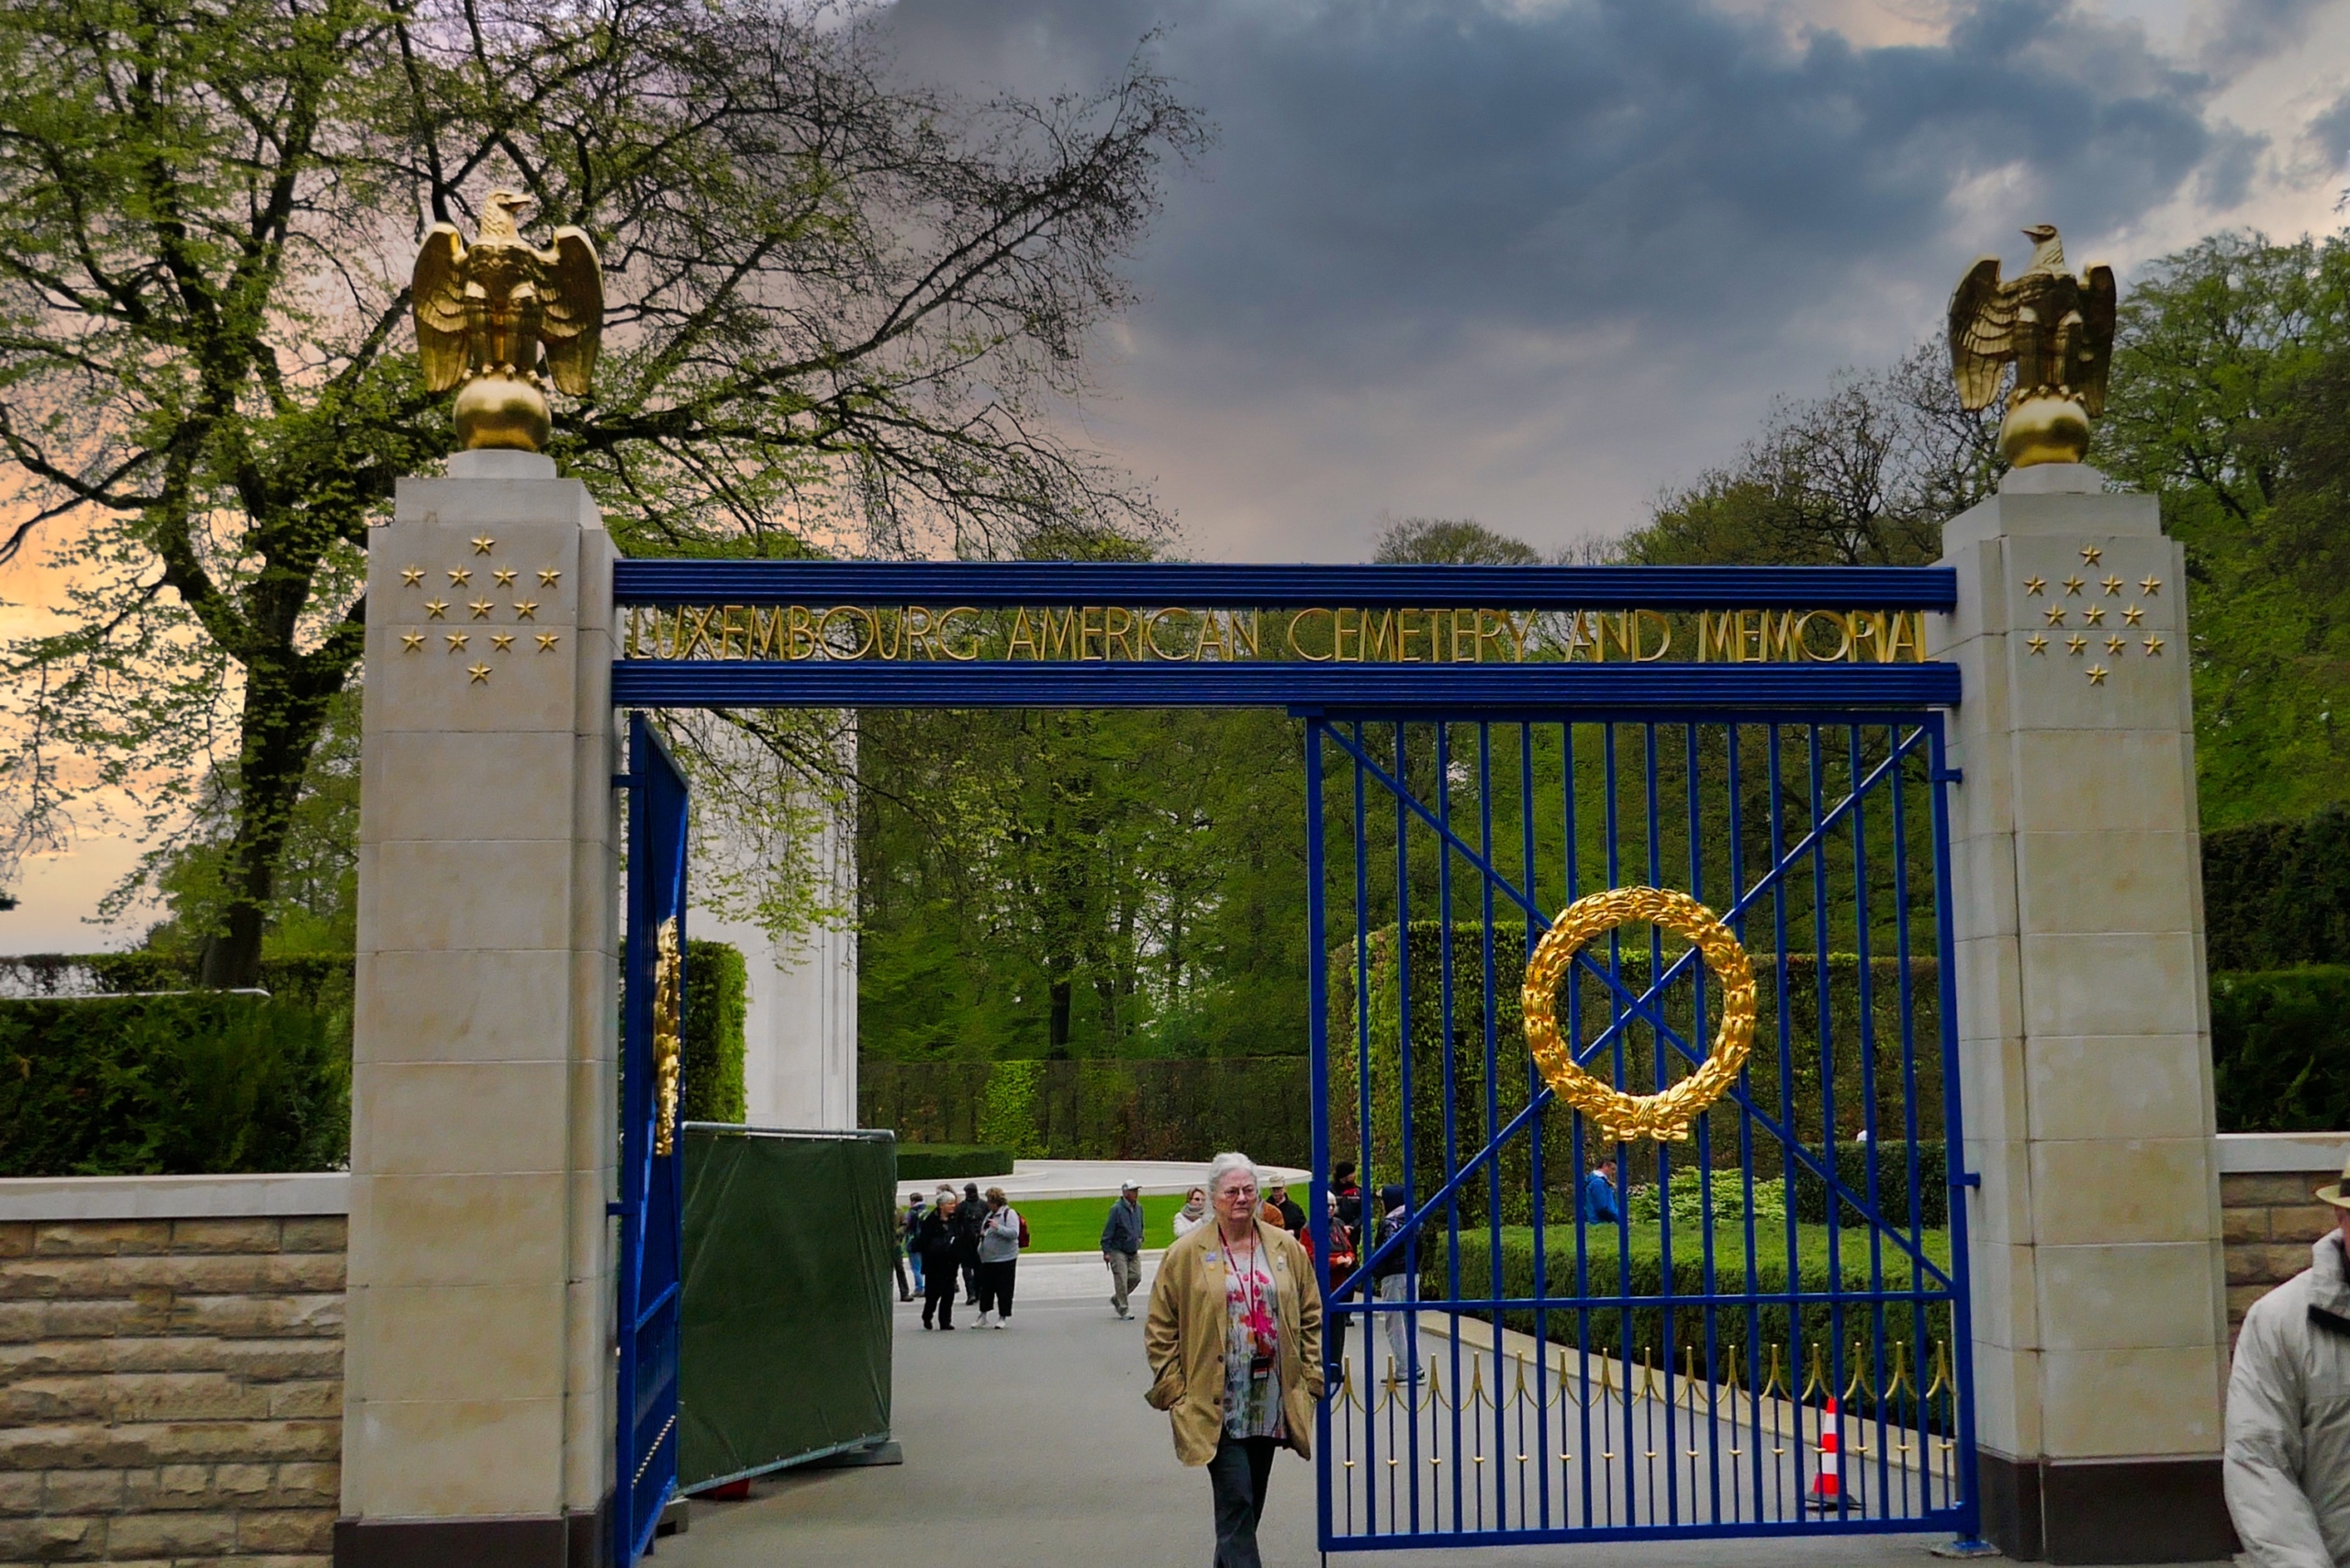 opened blue iron gate with gold wreath at the Luxembourg American Cemetery. A cloudy sky frames this door of remembrance